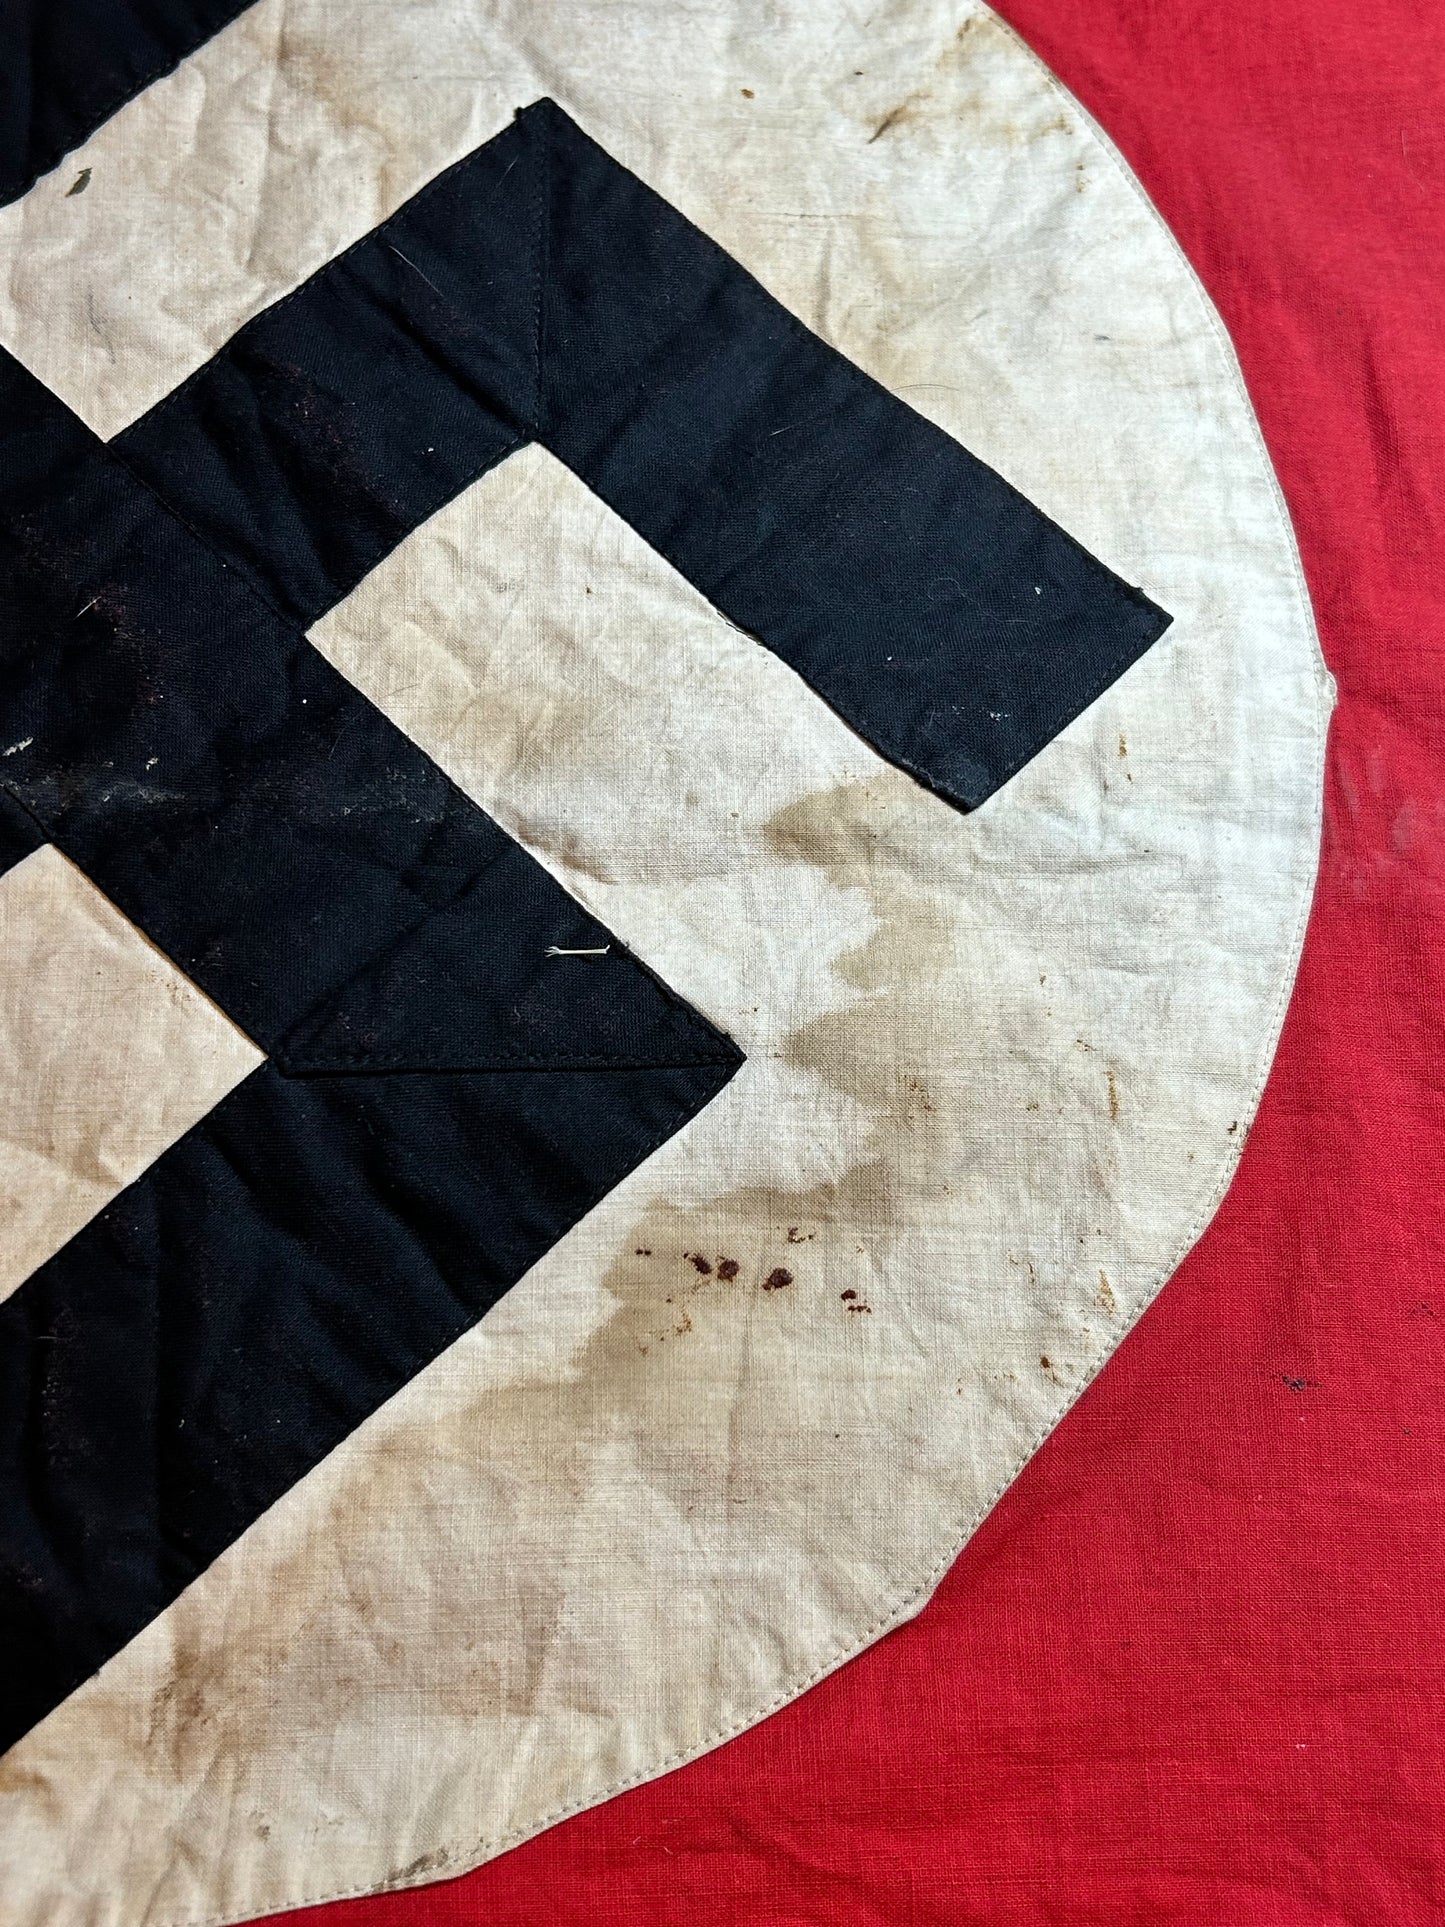 Rough NSDAP flag 53x30 inches. Small “rip” with original nails used for hanging